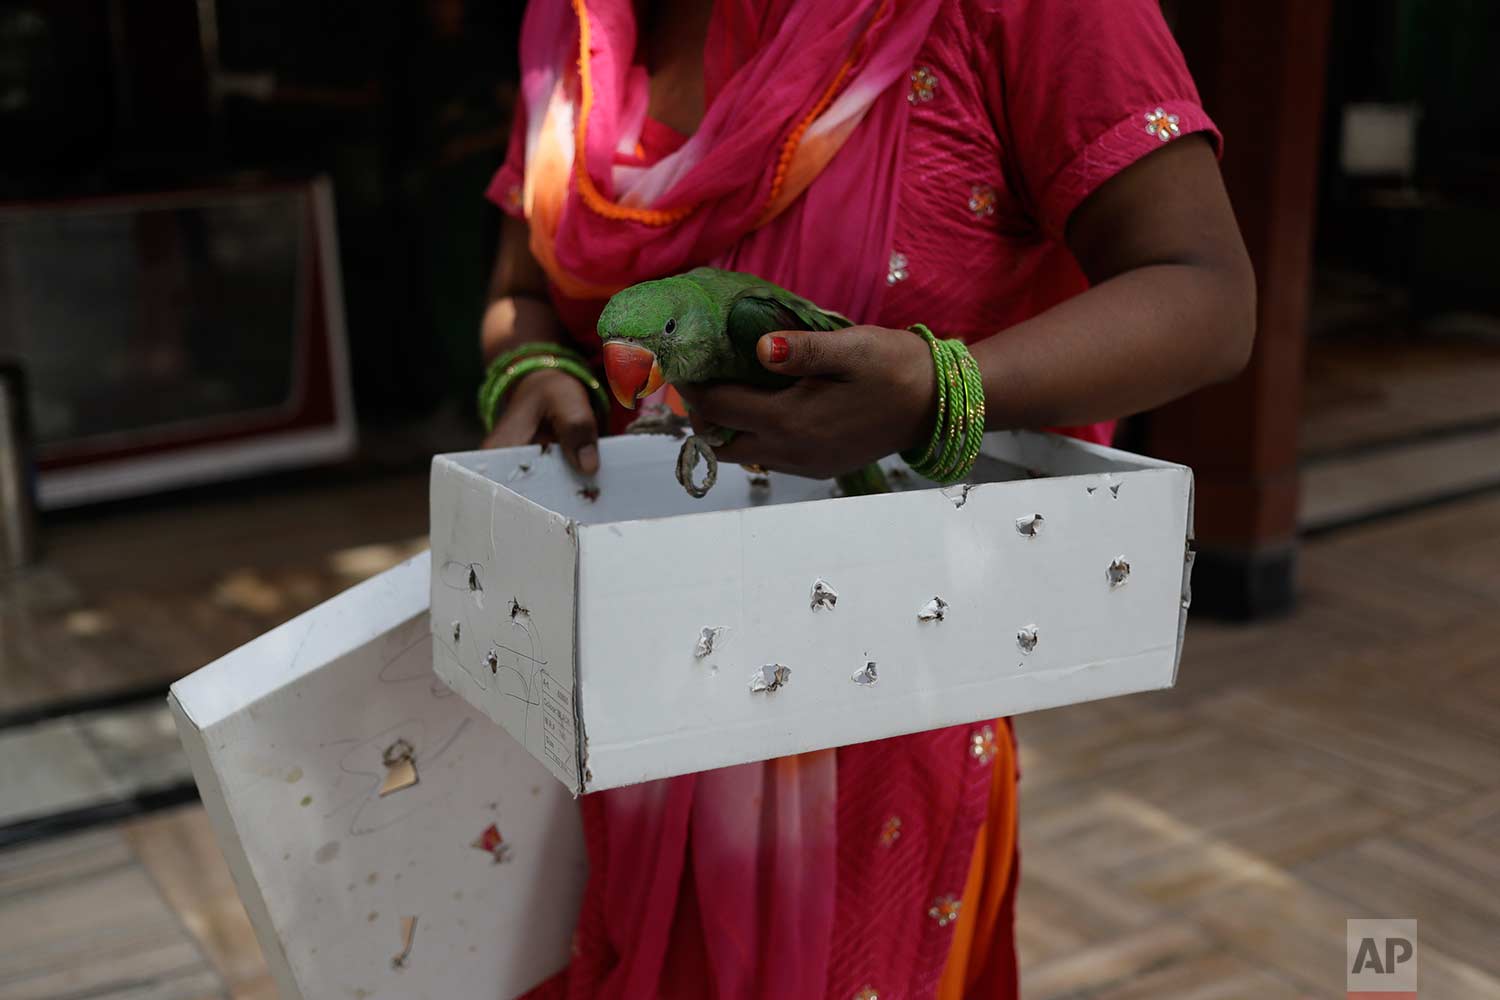  In this Wednesday, Aug. 16, 2017 photo, an Indian woman brings a parrot injured by kite strings to the Charity Birds Hospital in New Delhi, India. (AP Photo/Tsering Topgyal) 